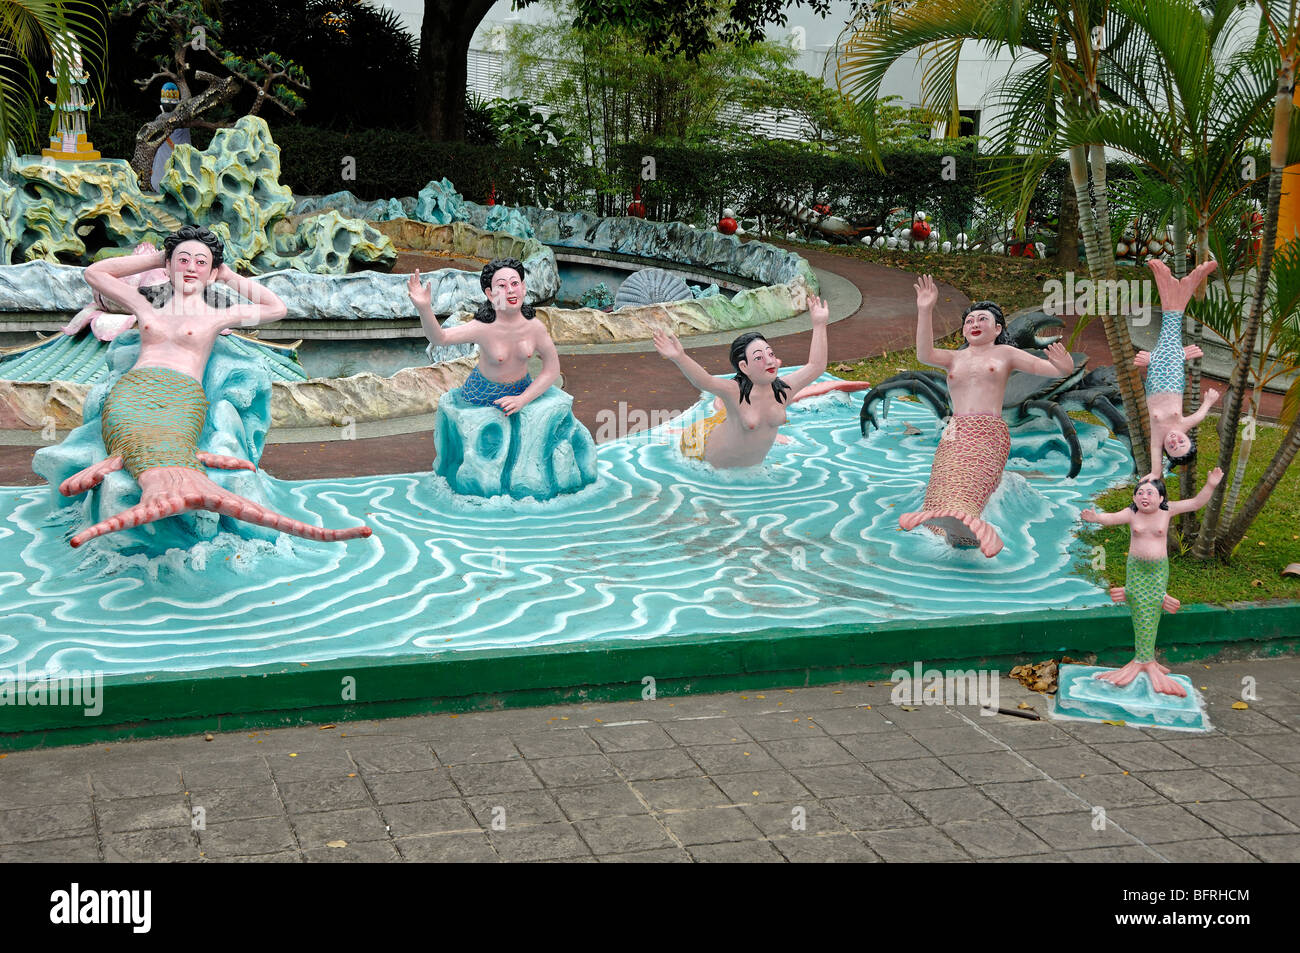 Mermaids or Mermaid Statues in the Signature Pond, Tiger Balm Gardens Chinese Theme Park, Singapore Stock Photo